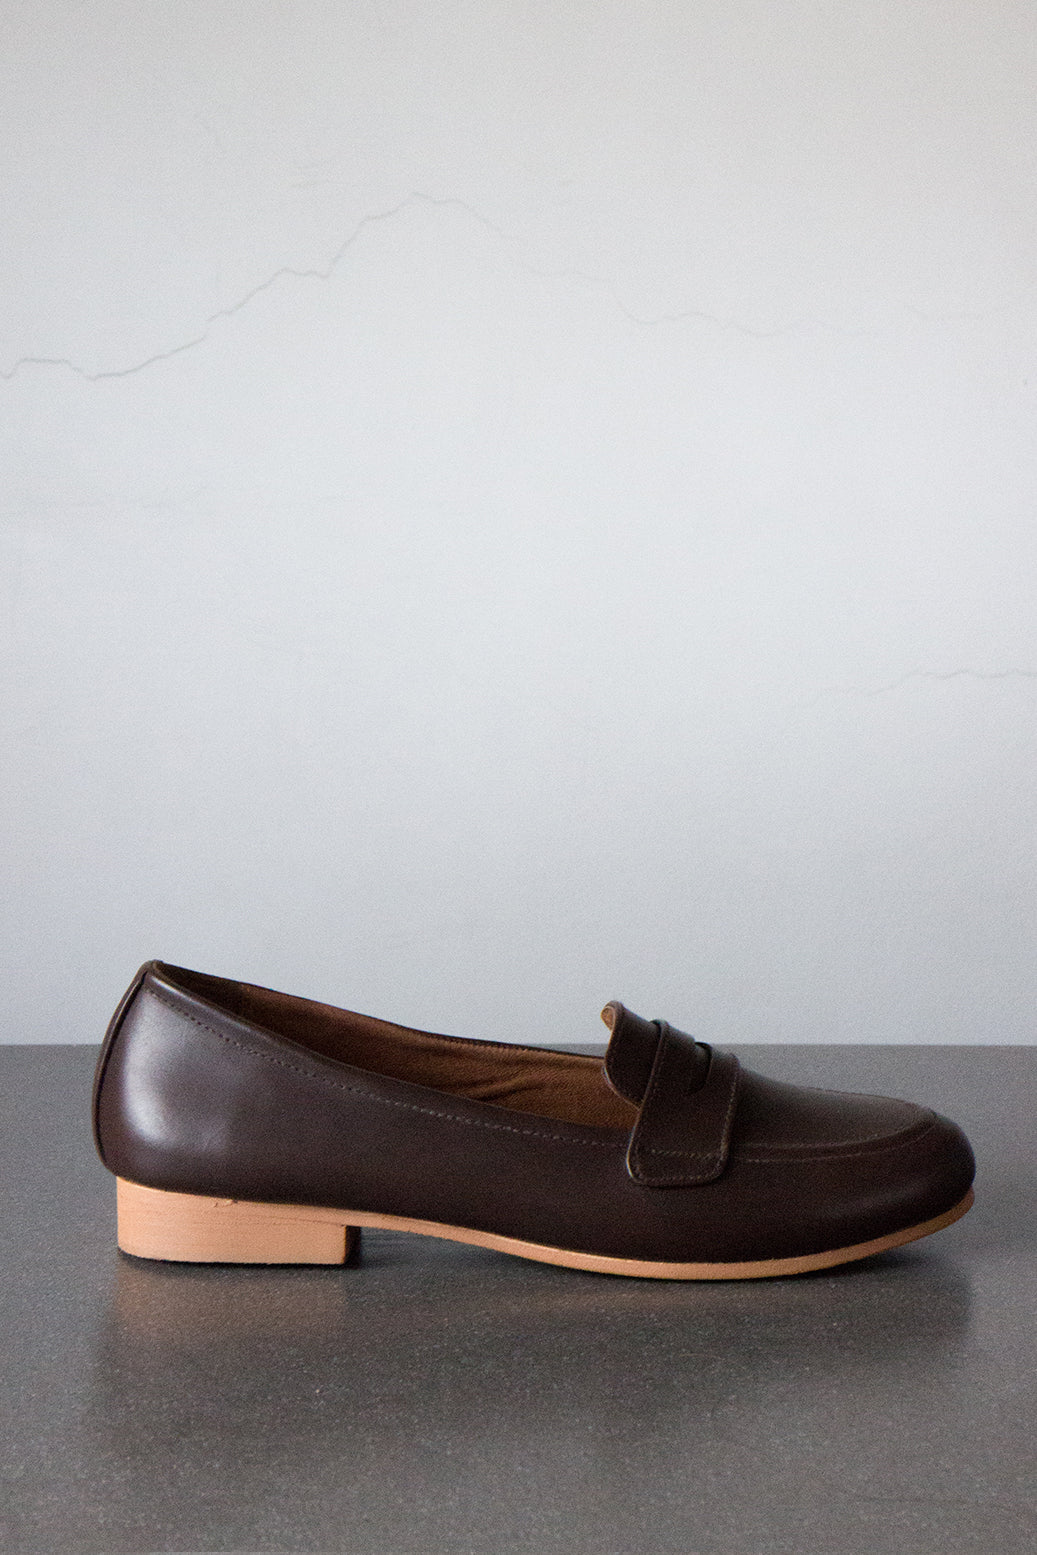 andanté | The Penny Loafer in Dark Brown